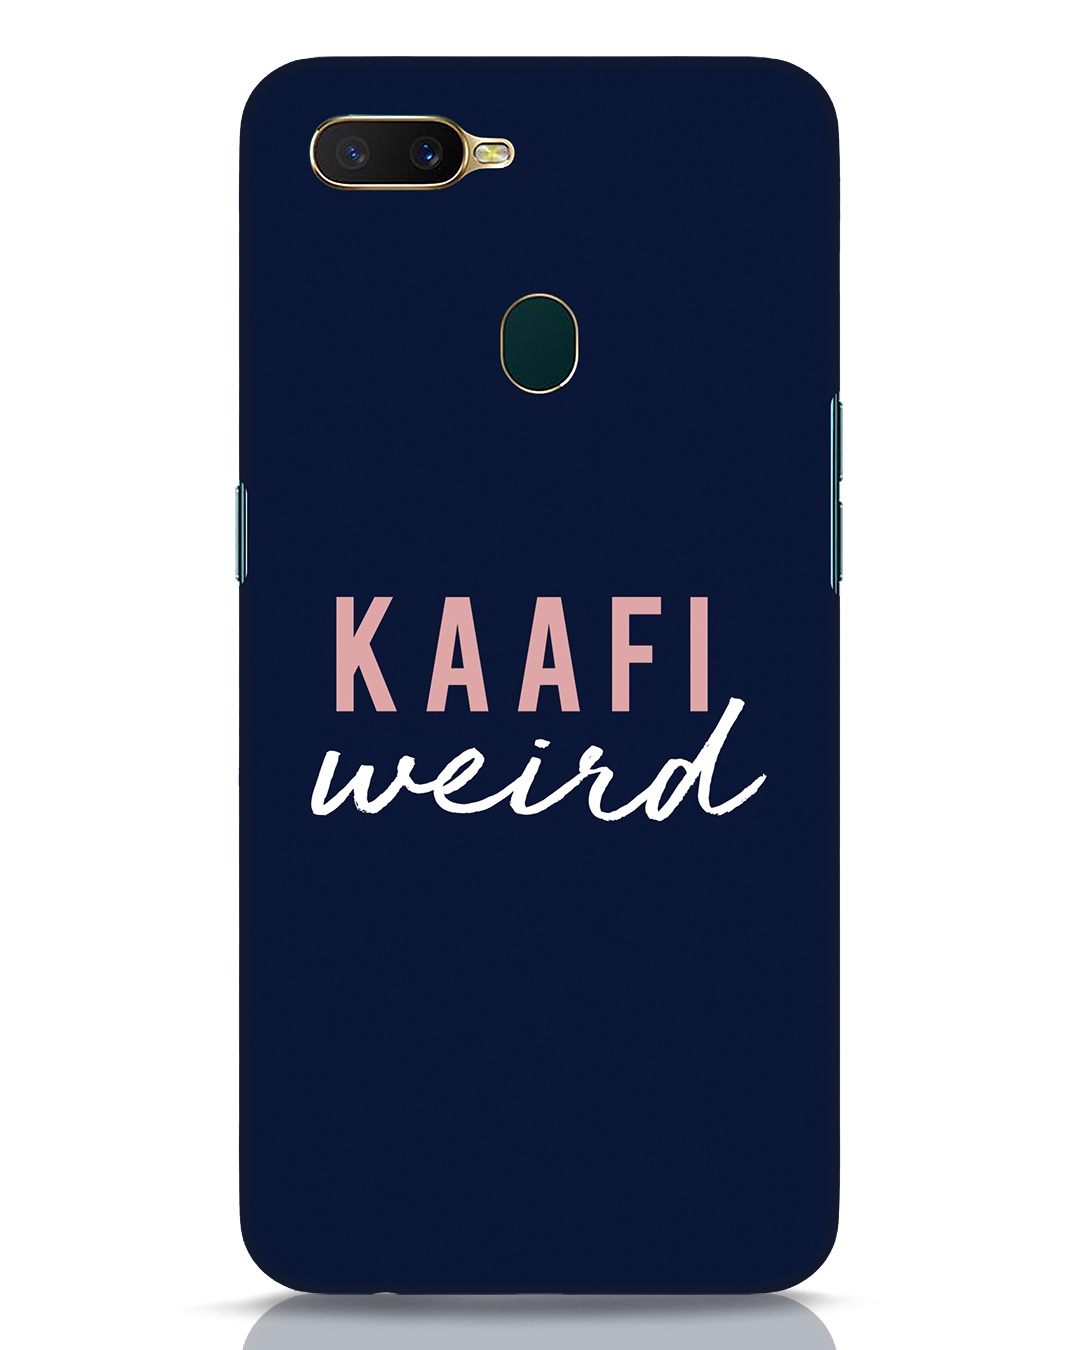 Buy Kaafi Weird Oppo A7 Mobile Cover for Unisex Online at Bewakoof